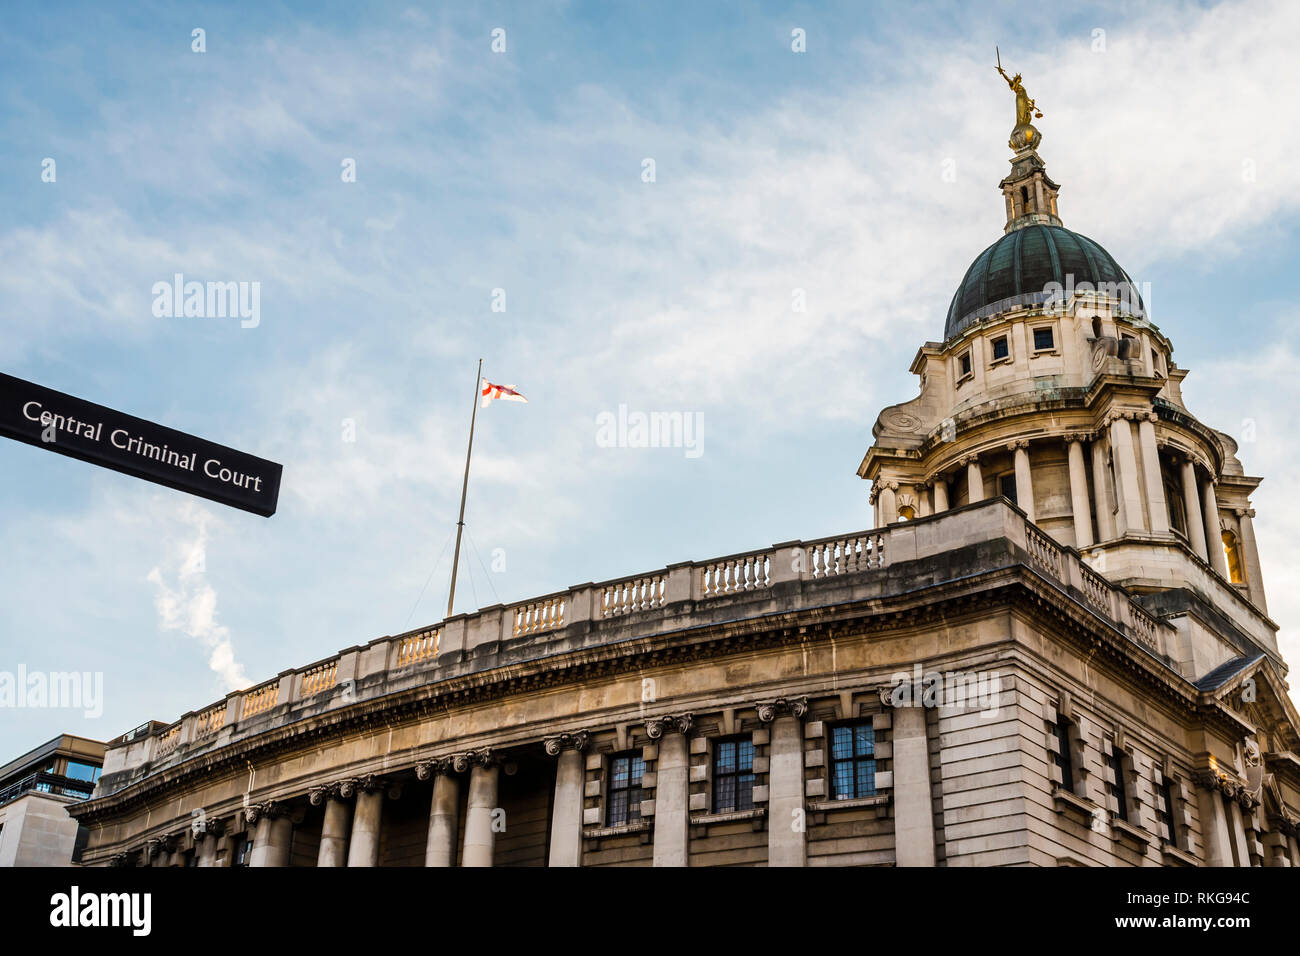 Sign pointing towards the Central Criminal Court, Old Bailey, London, UK Stock Photo